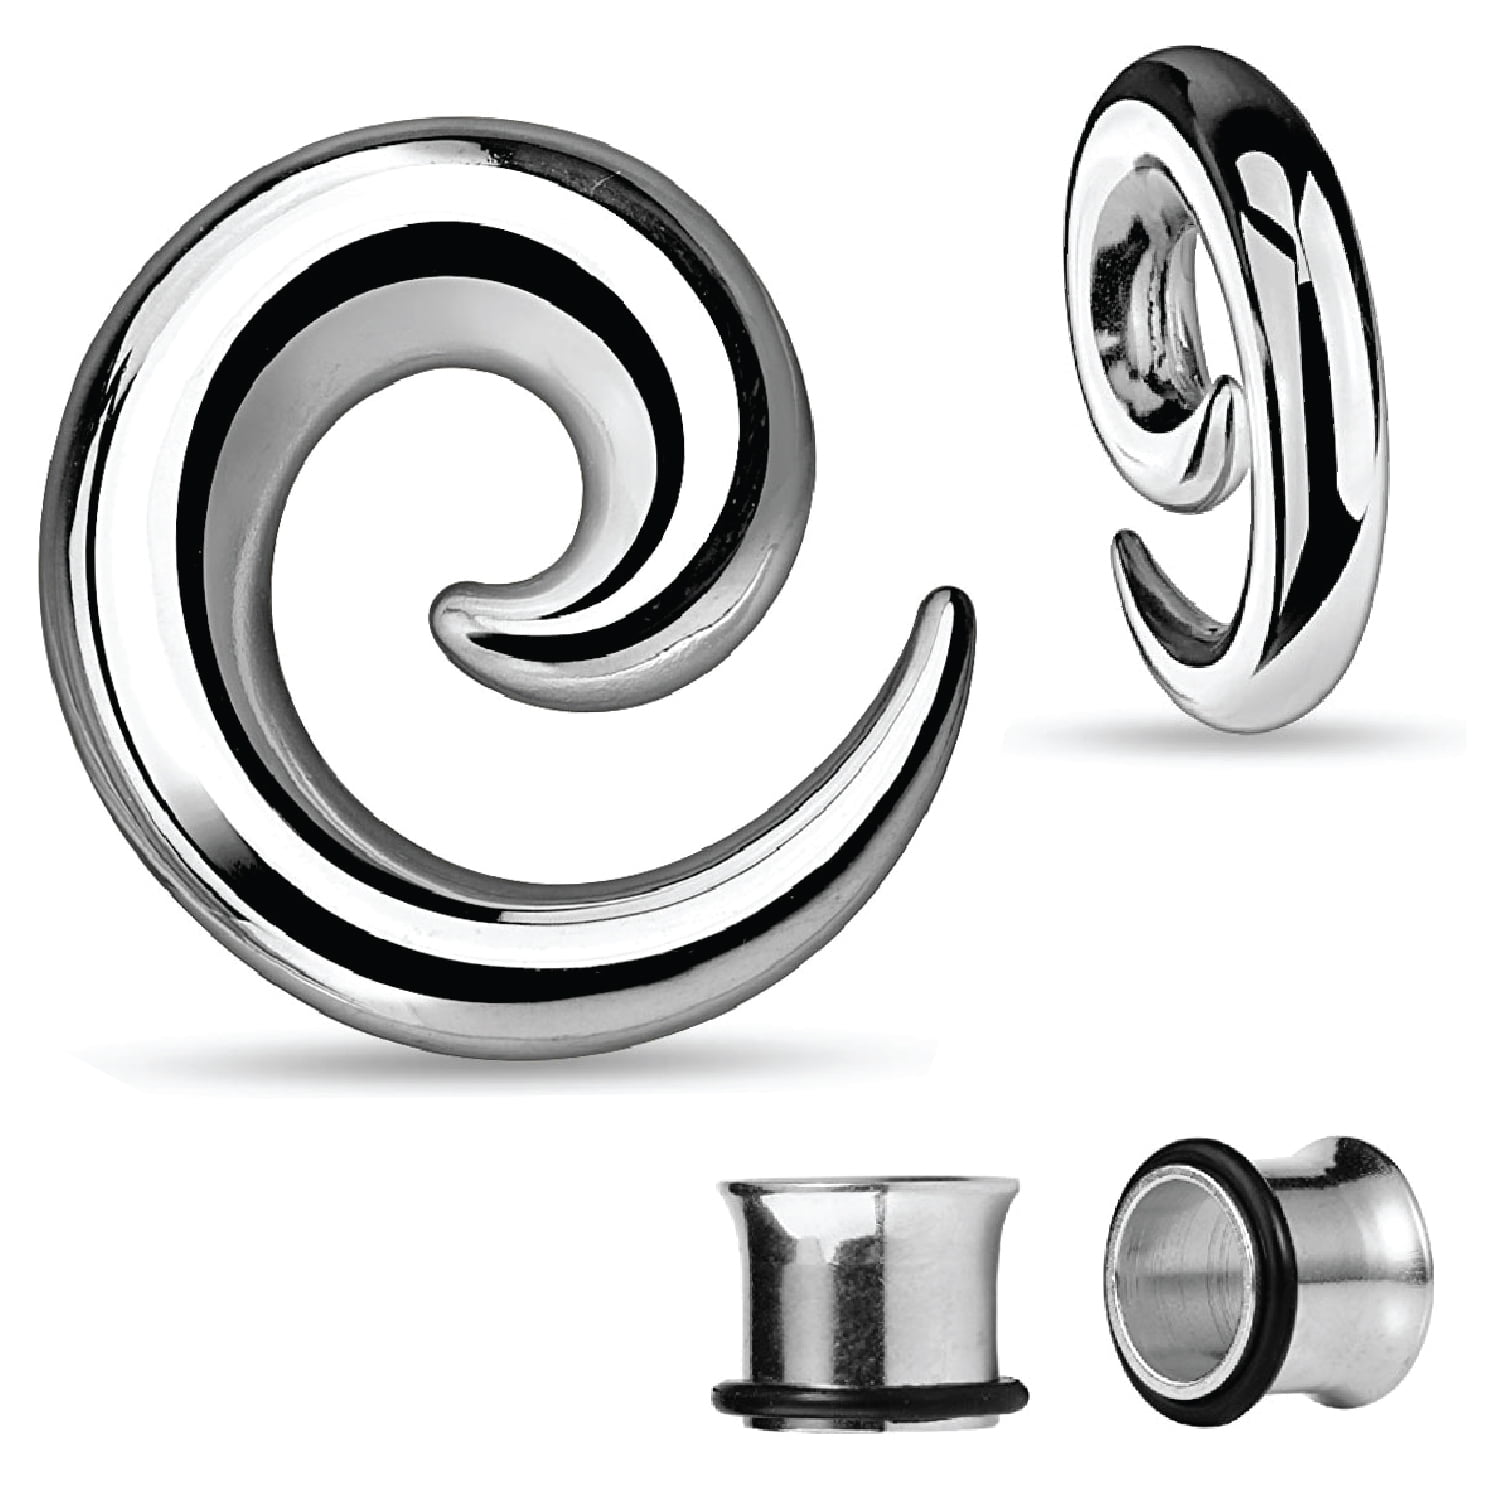 AtoZ Piercing Hollow 316L Surgical Steel Spiral Tapers Ear Plug 